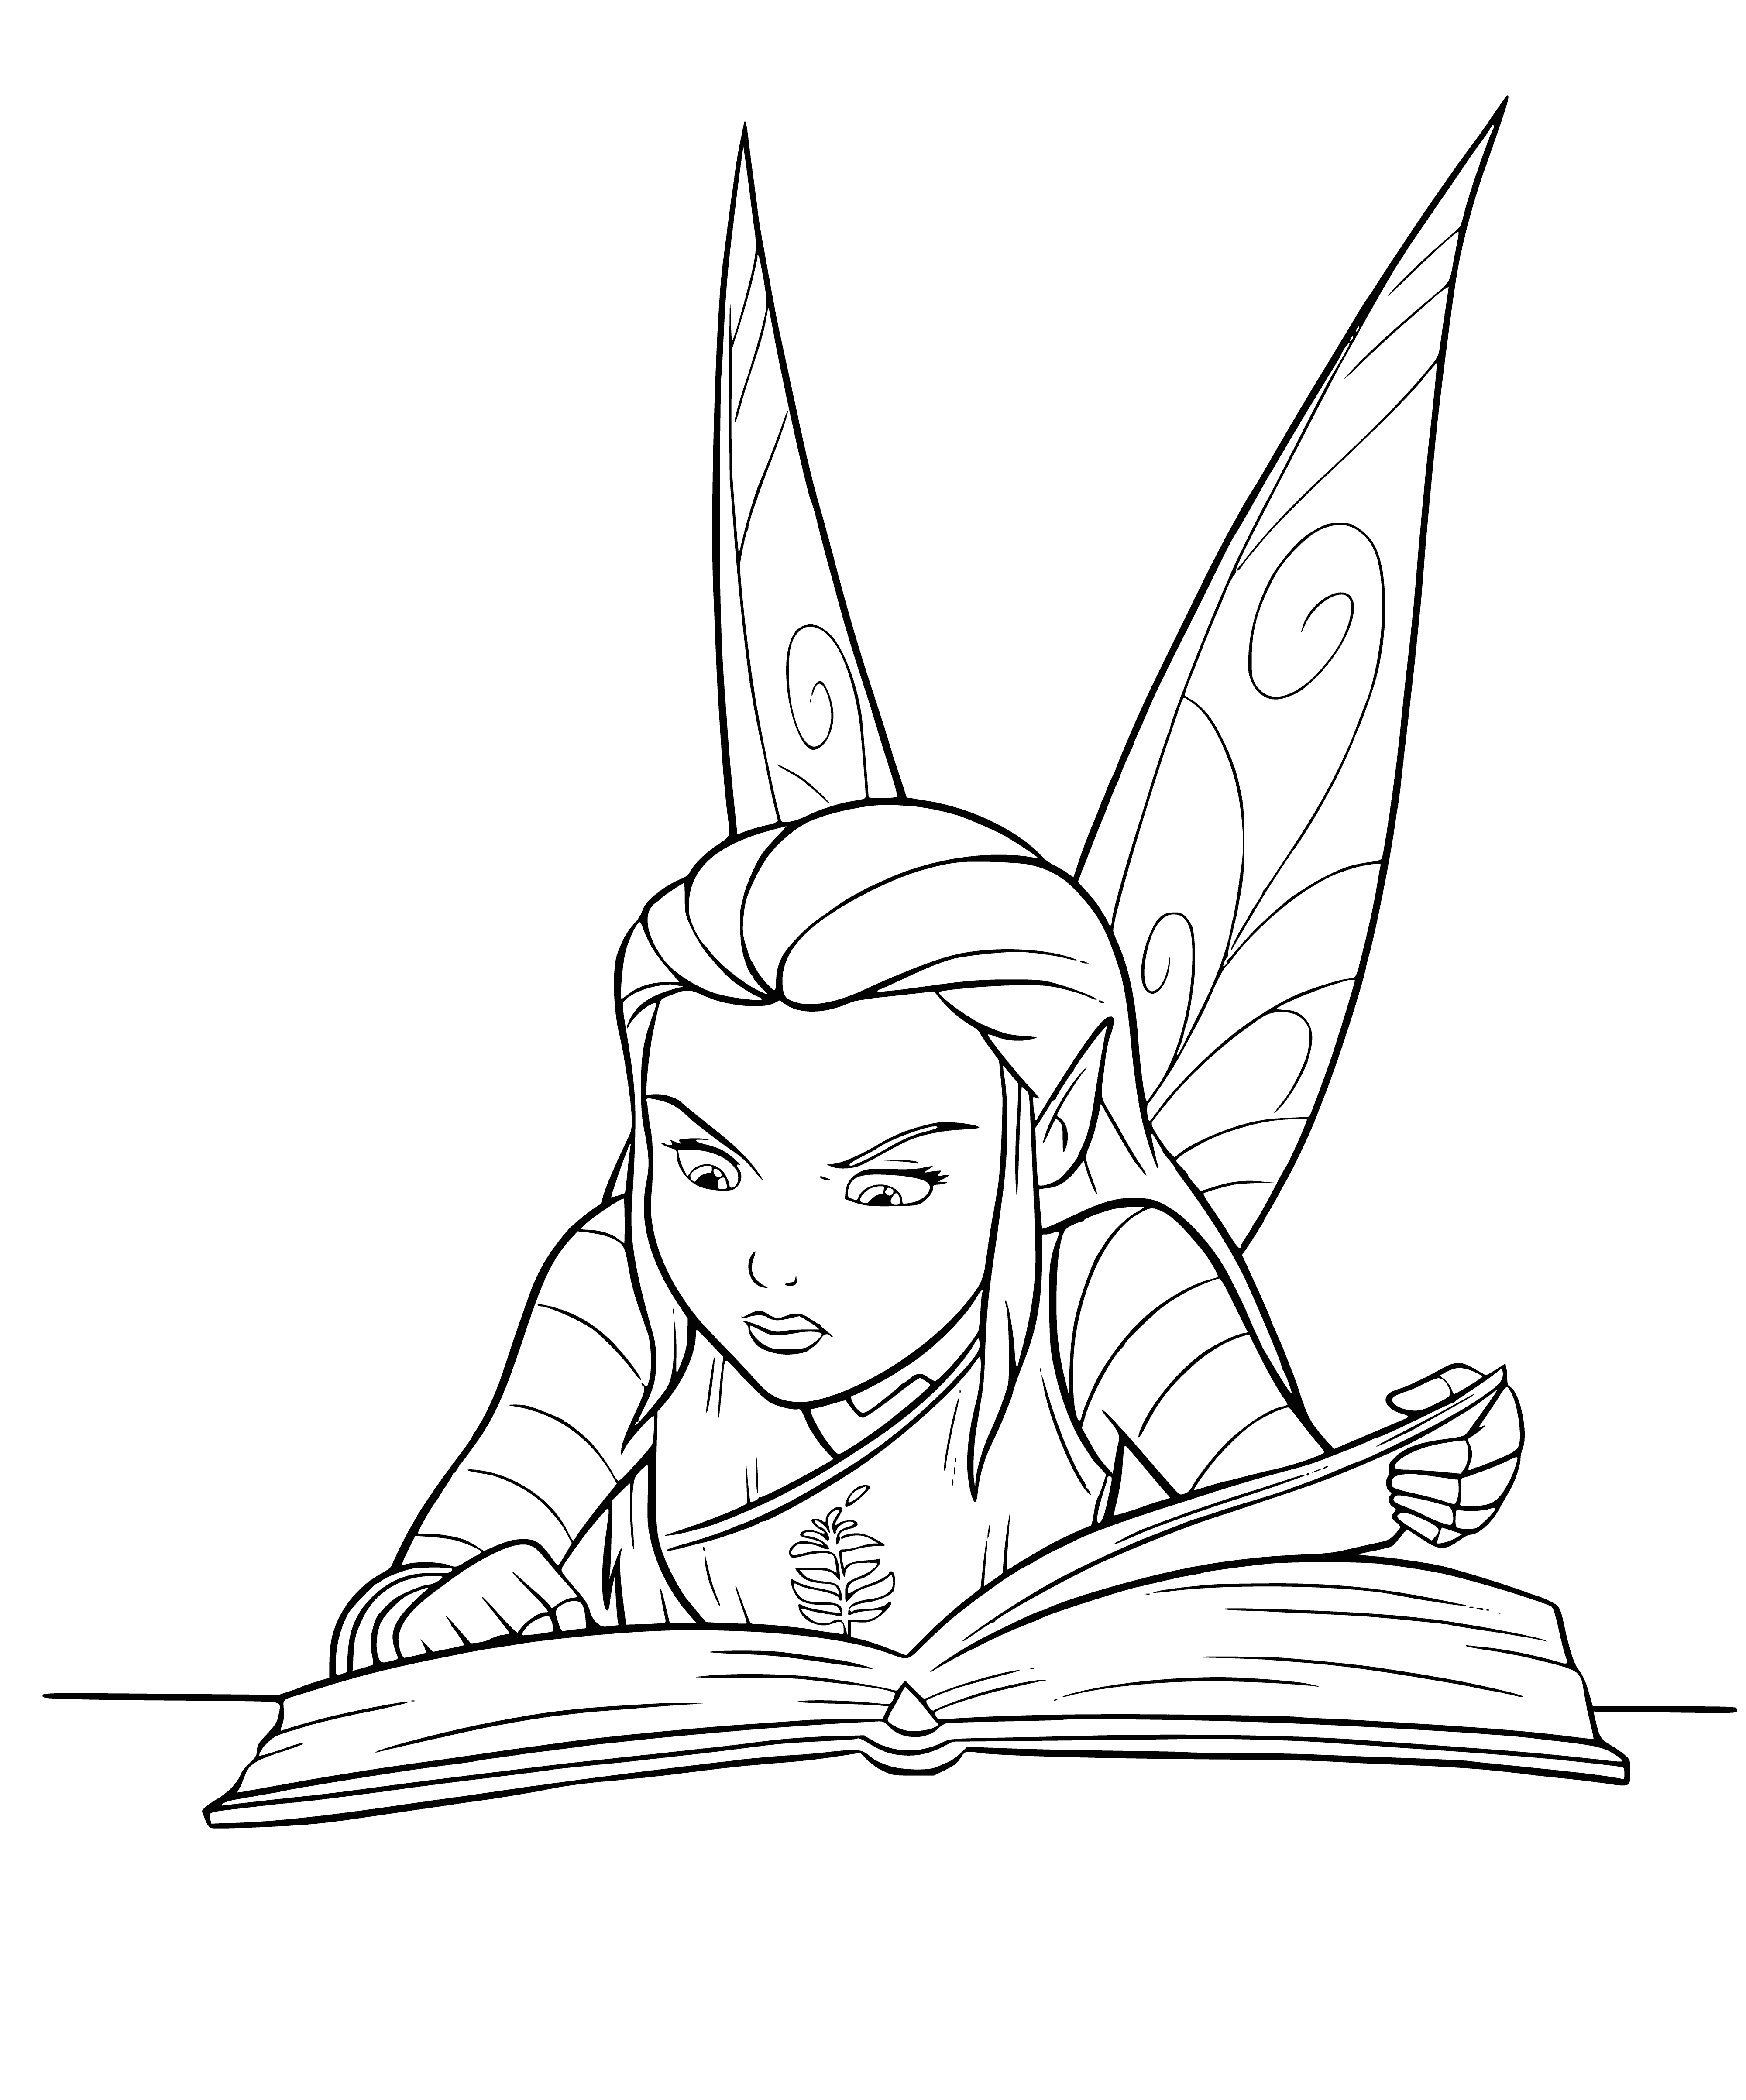 Fairy Hunter Nyx coloring page